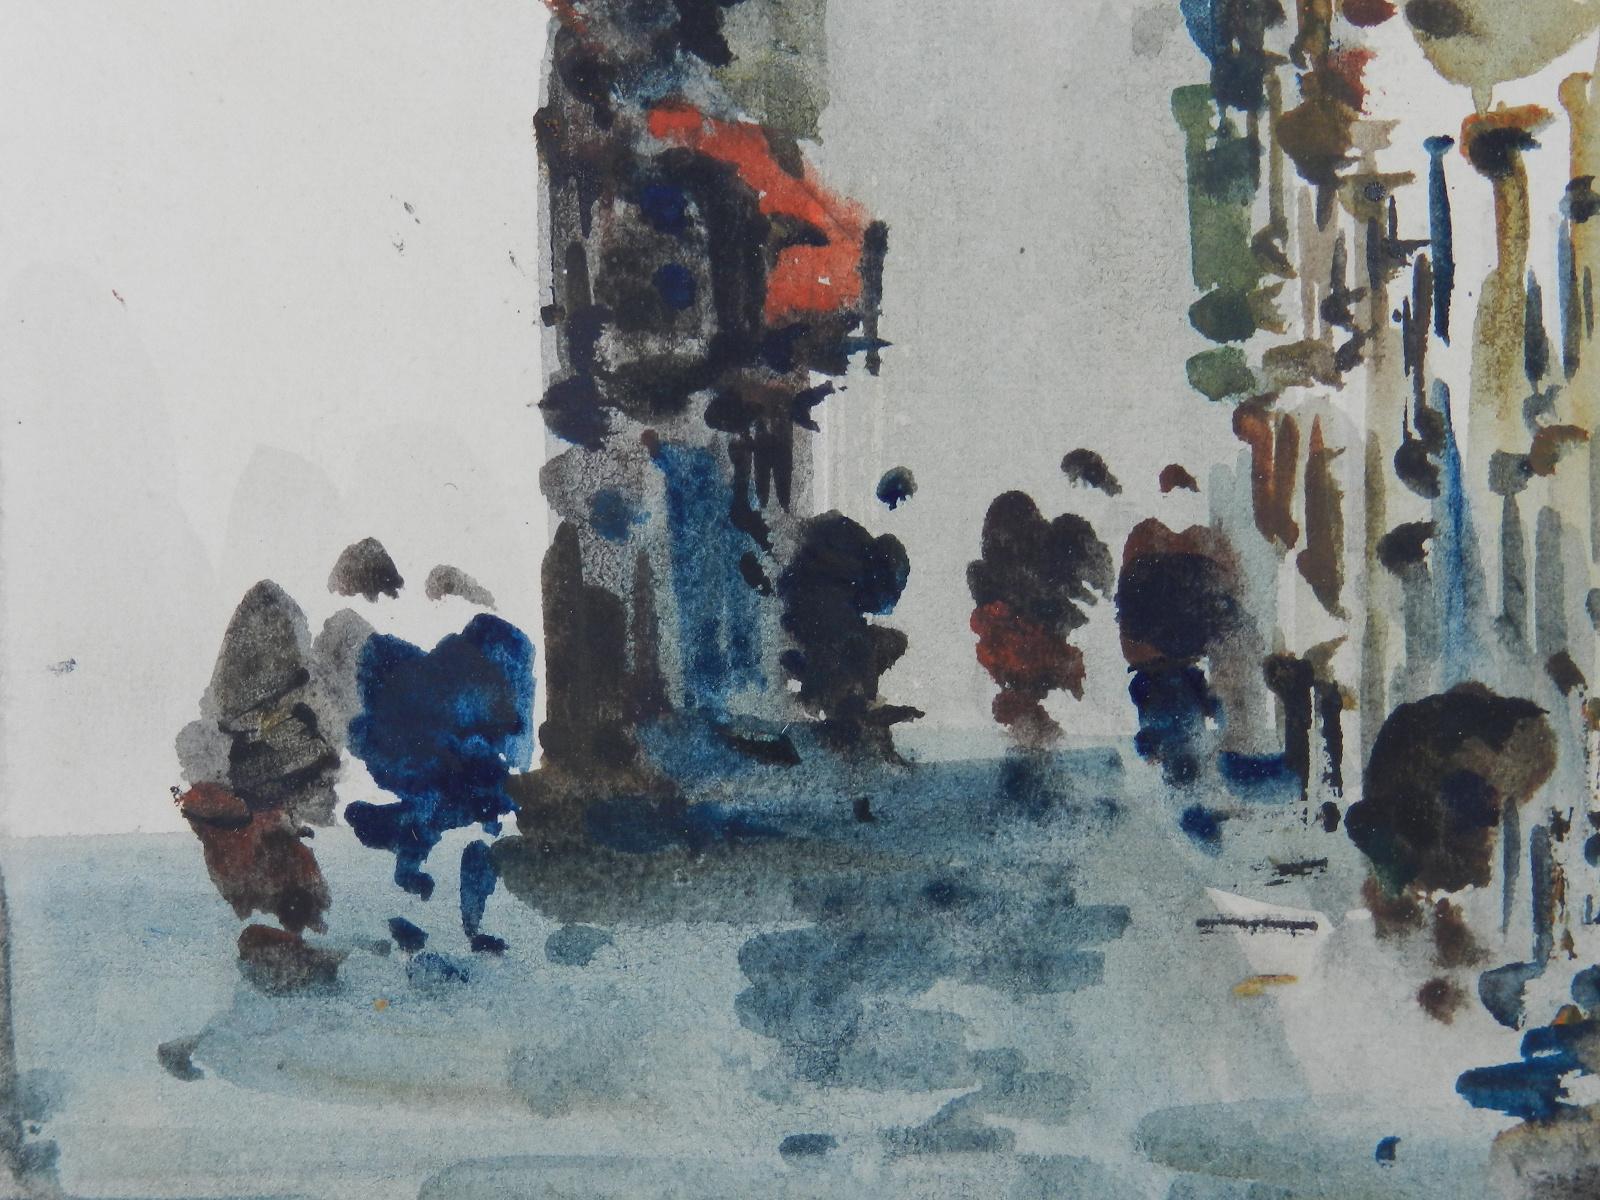 Continental Watercolor Street Scene signed Diaz Mid century c1950-60s
Spanish Artist Diaz 20th century, possibly Jose Diaz (or follower)
On good art paper mounted on card
Unframed


